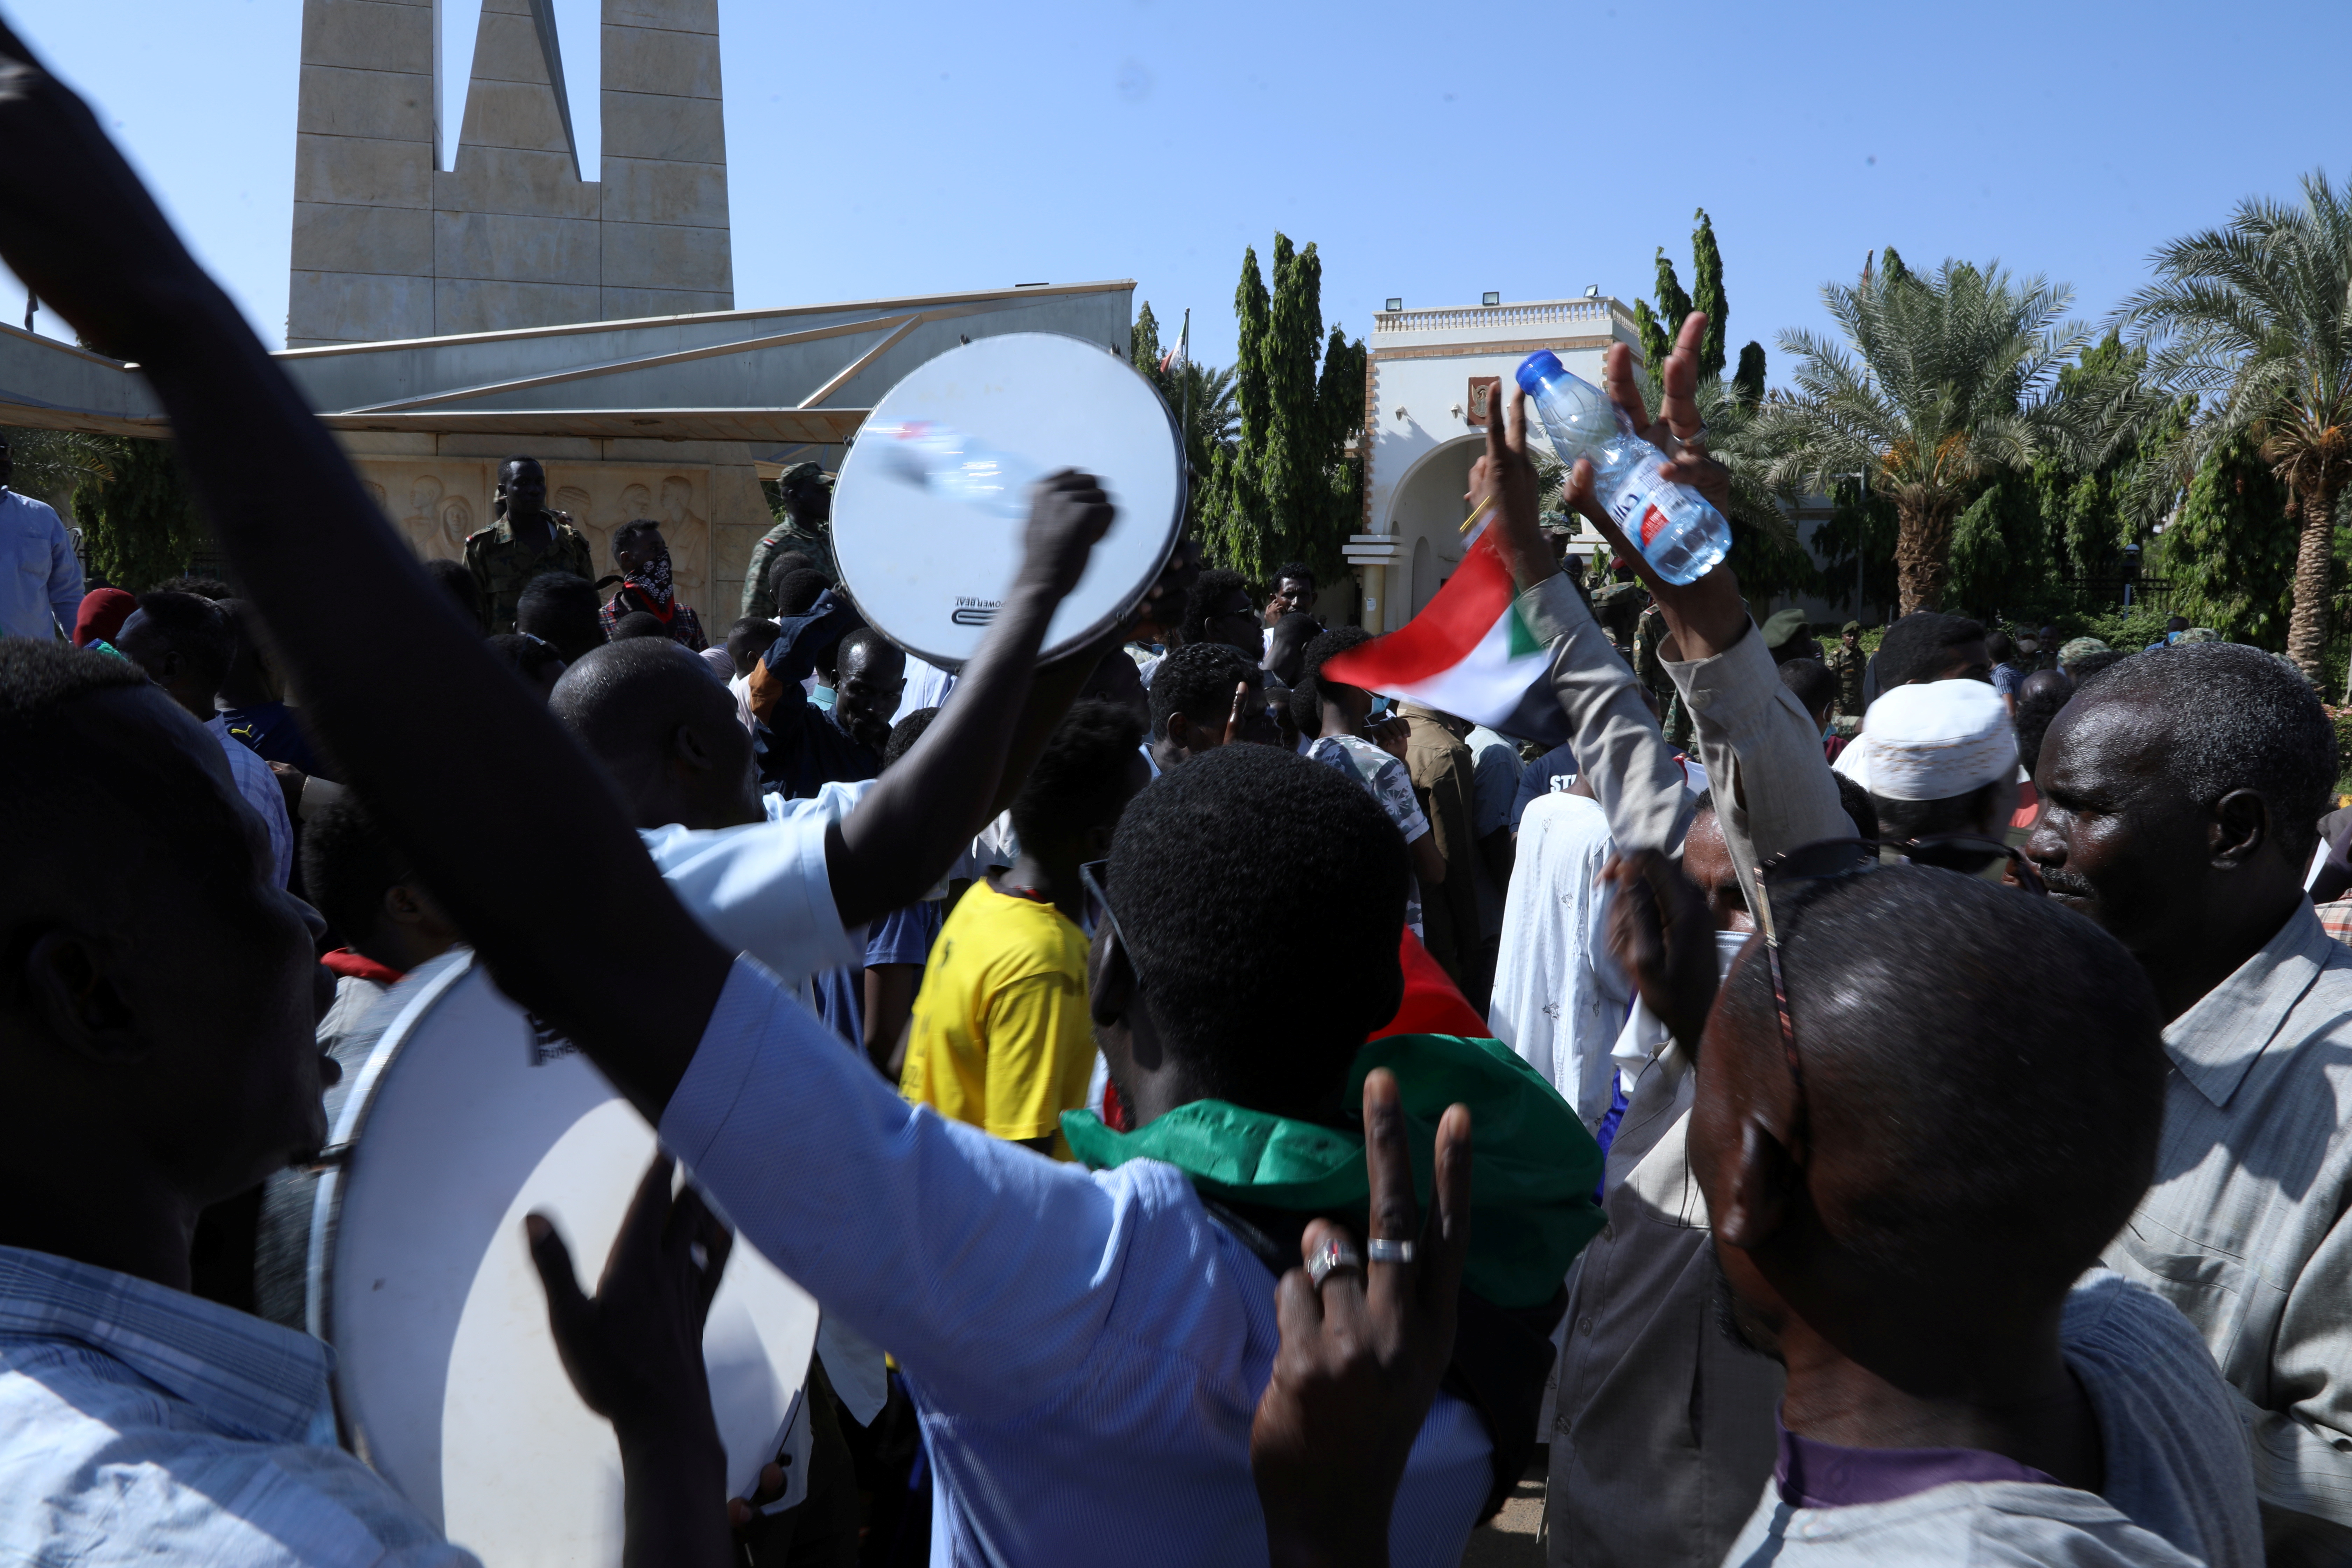 Military-aligned demonstrators gathered in front of the Presidential palace in Khartoum